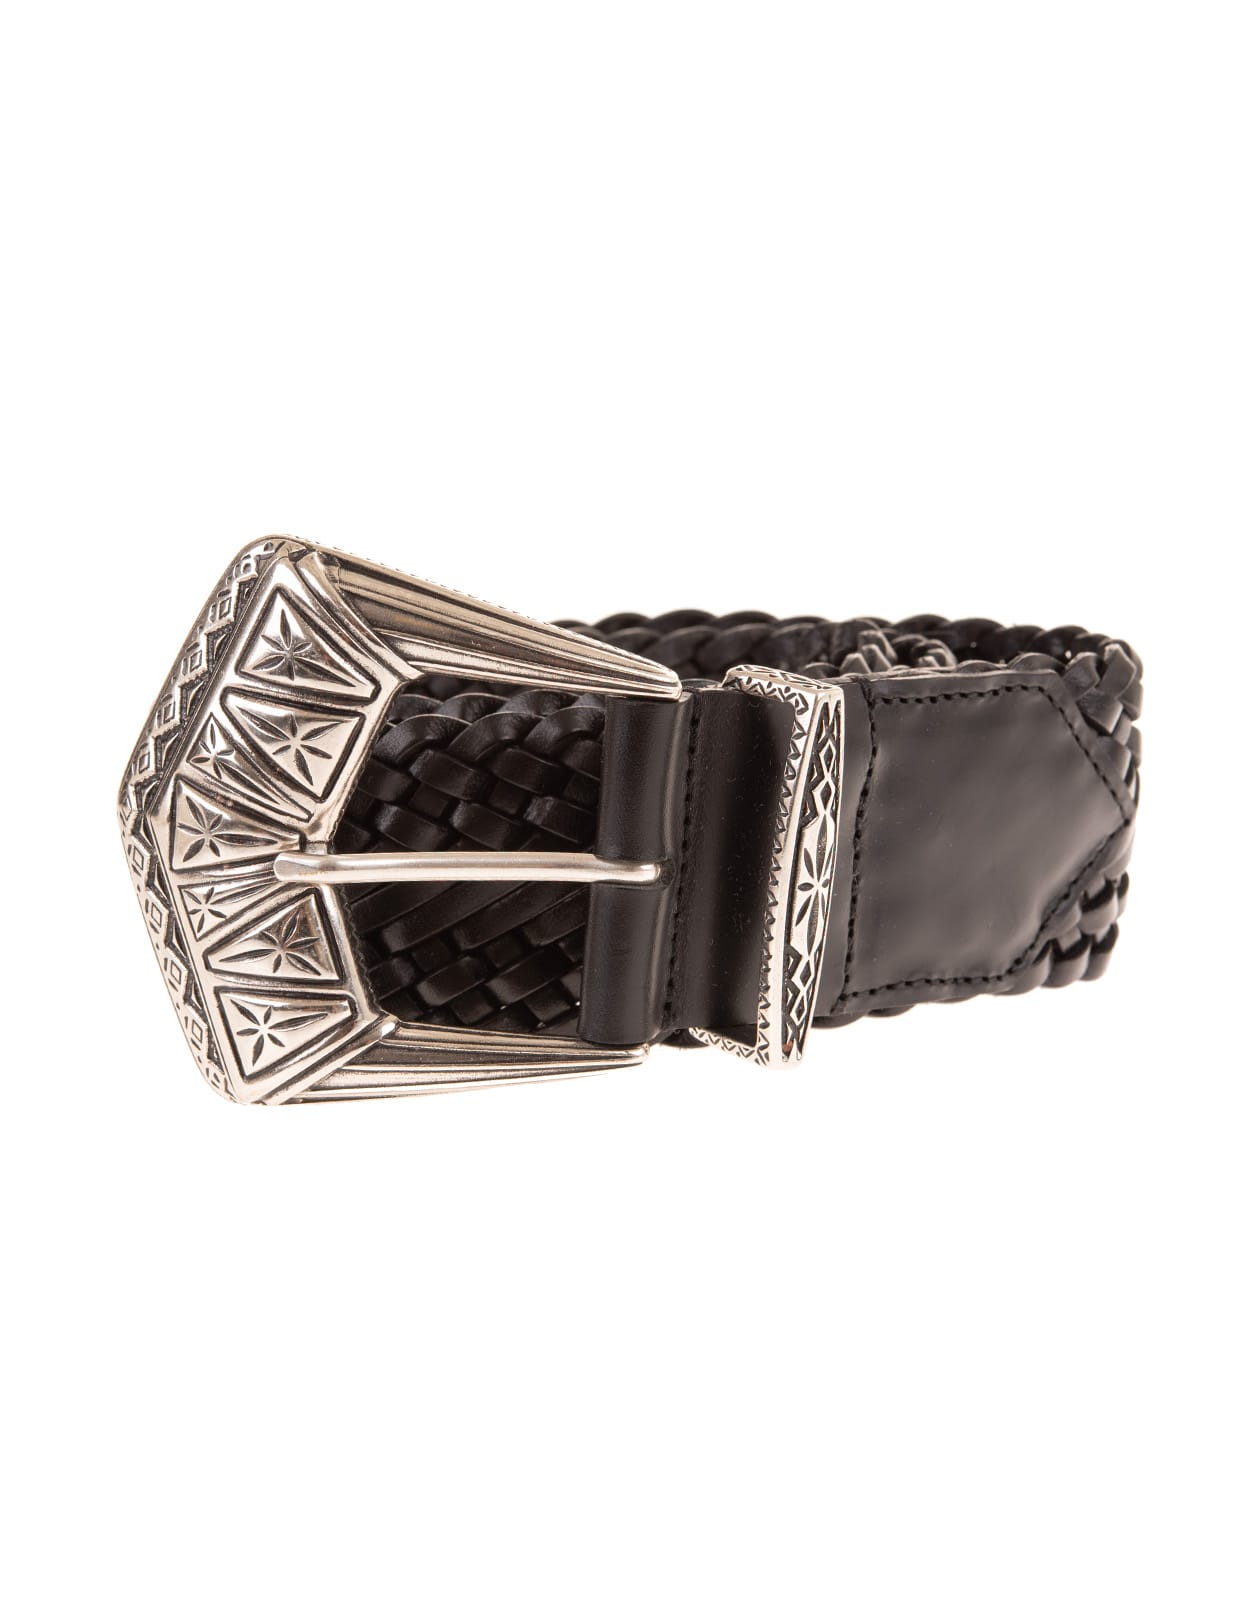 Etro Woman Black Braided Leather Belt With Metallic Buckle